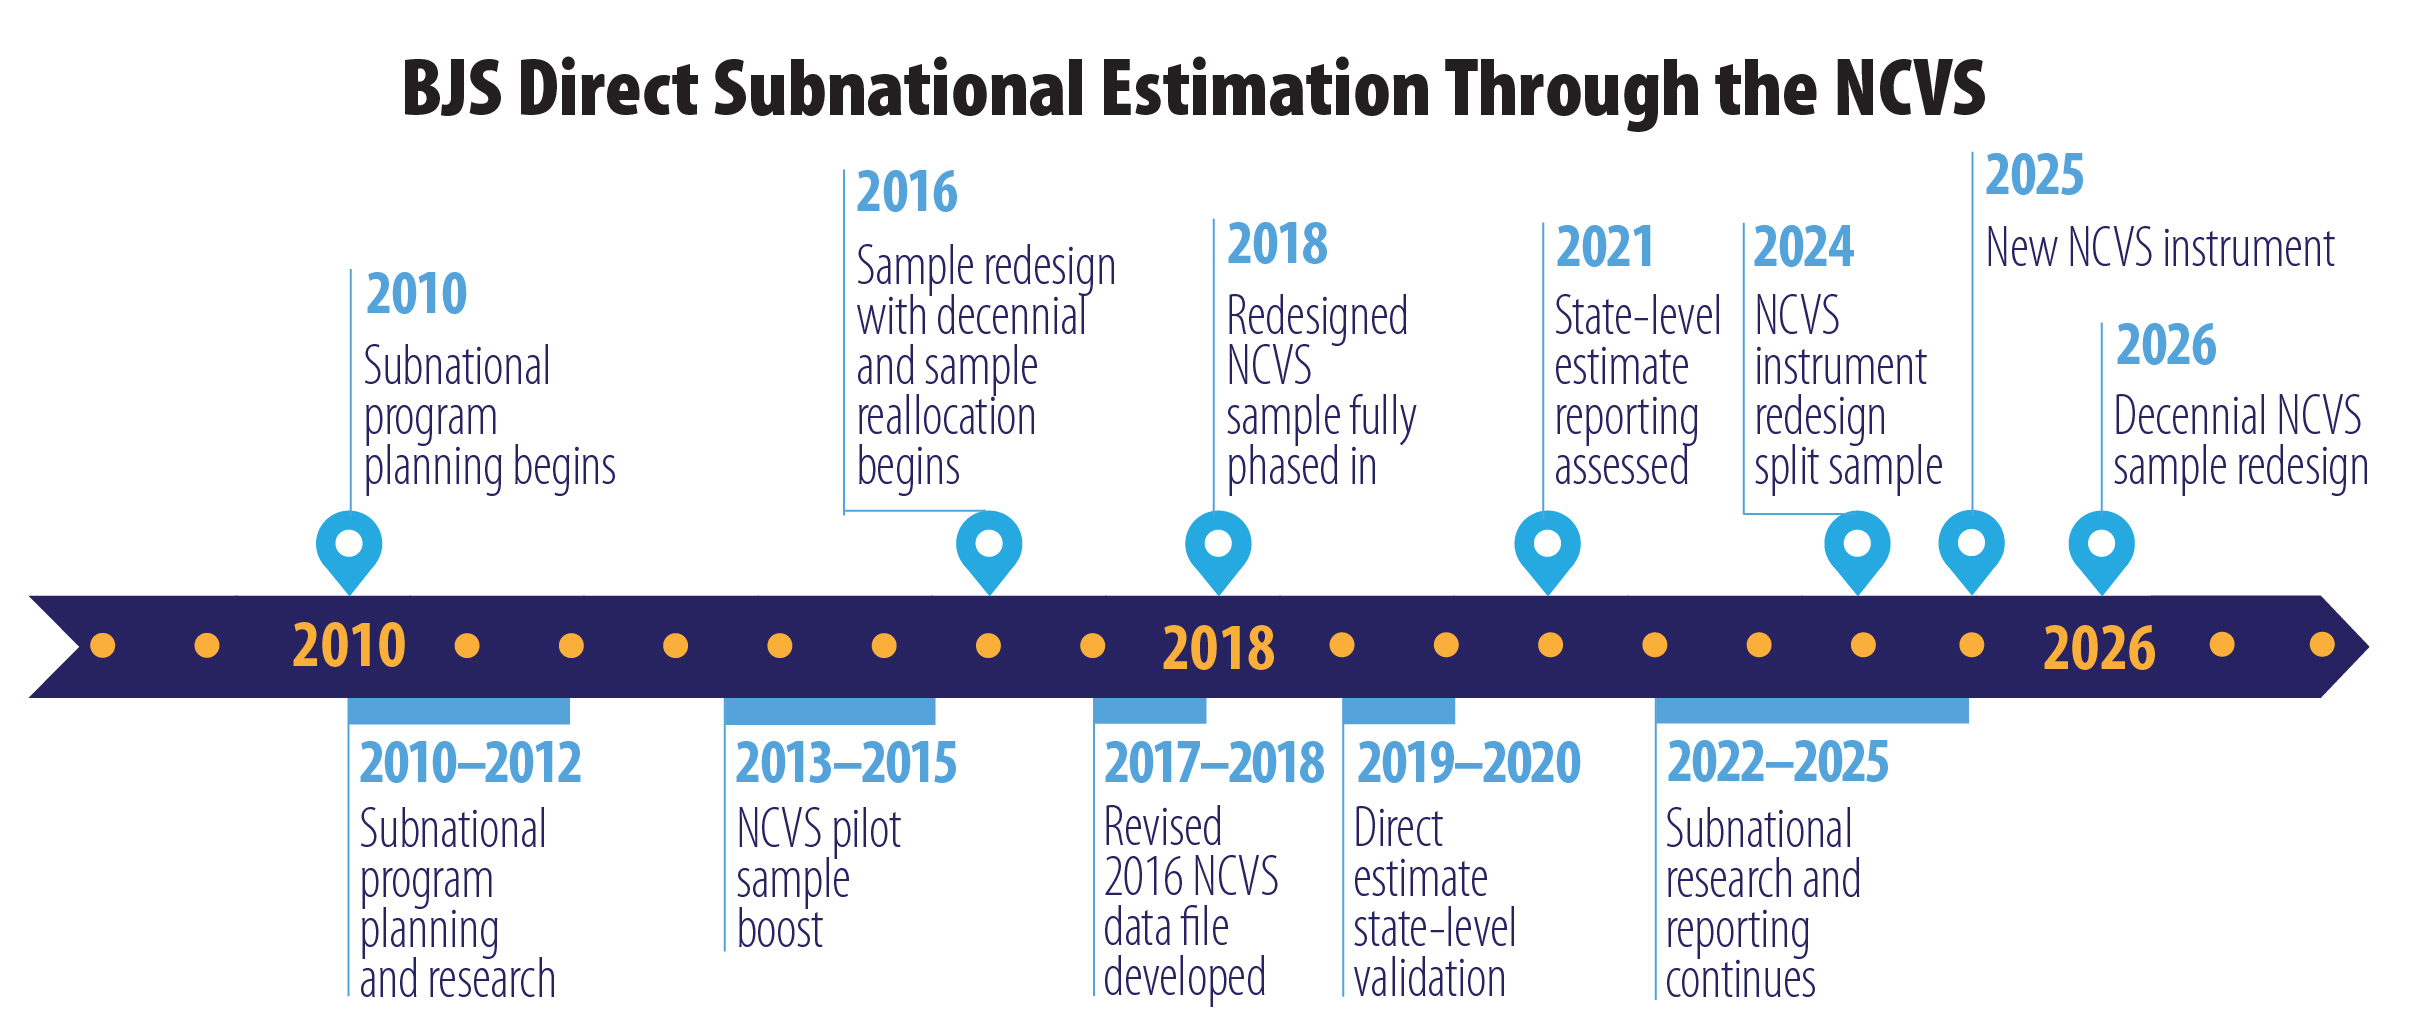 BJS Direct Subnational Estimation Through the NCVS Timeline that covers 2010 through 2026.